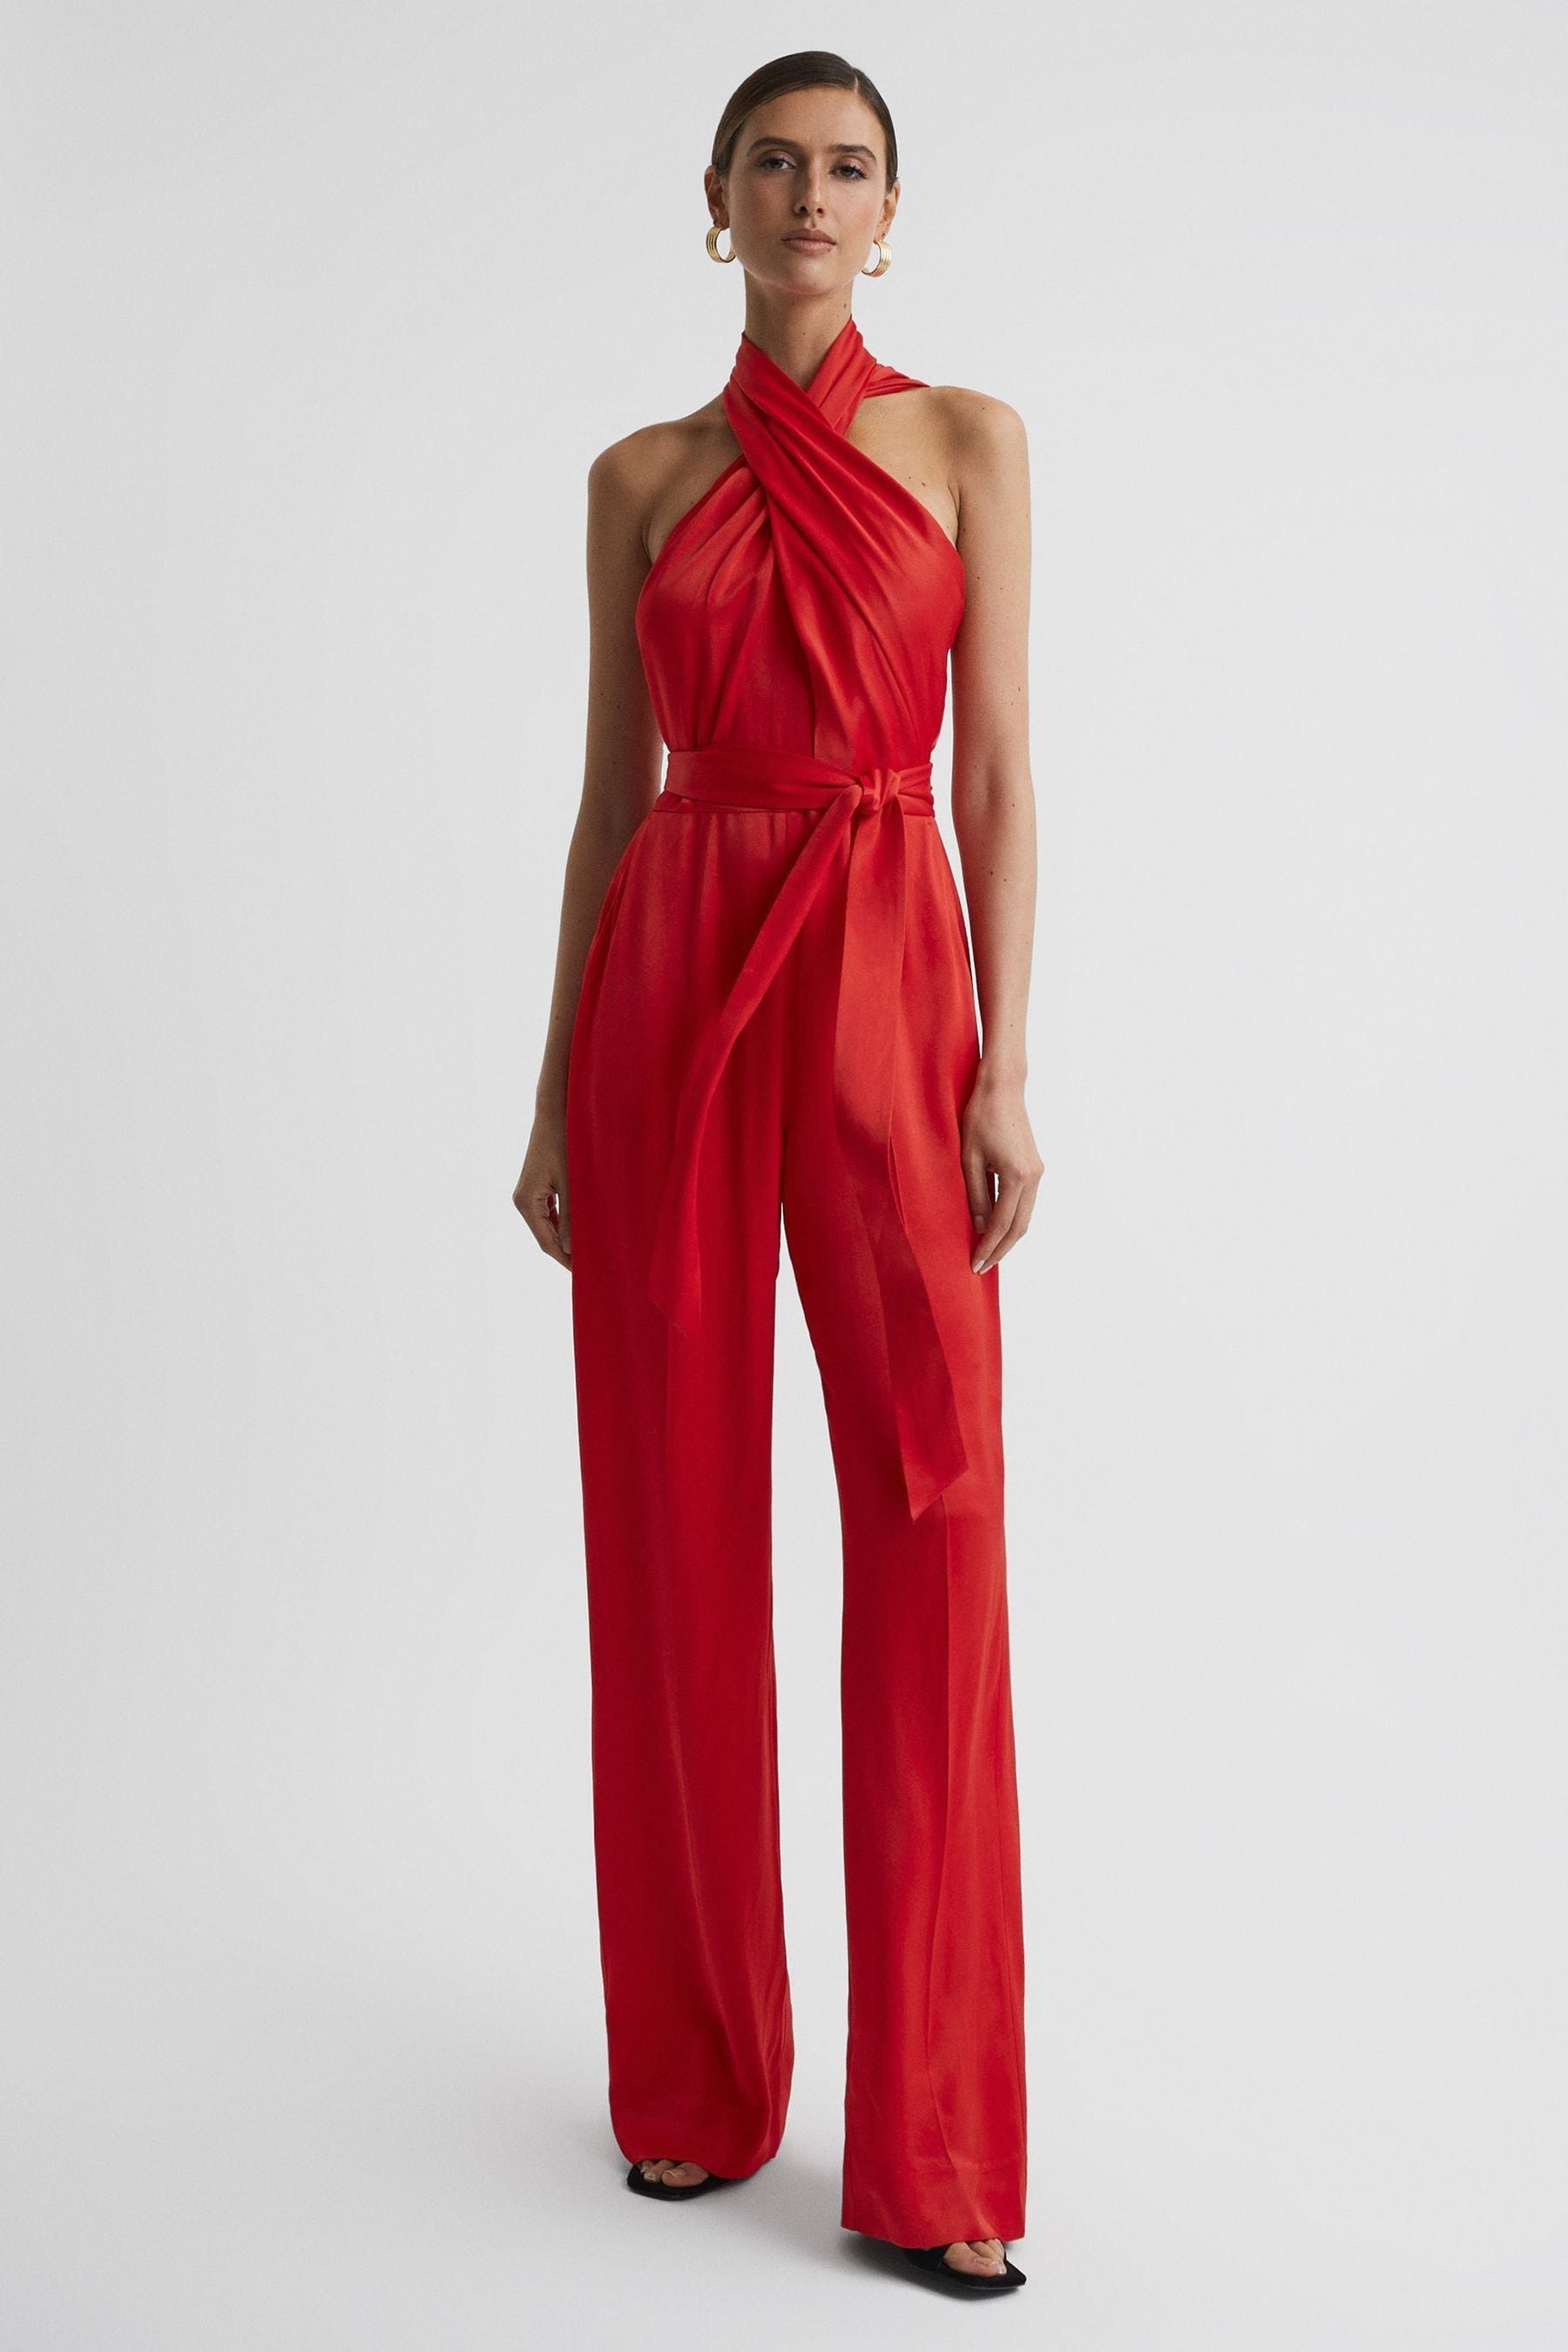 Reiss Jules - Red Satin Halter Neck Fitted Jumpsuit, Us 10